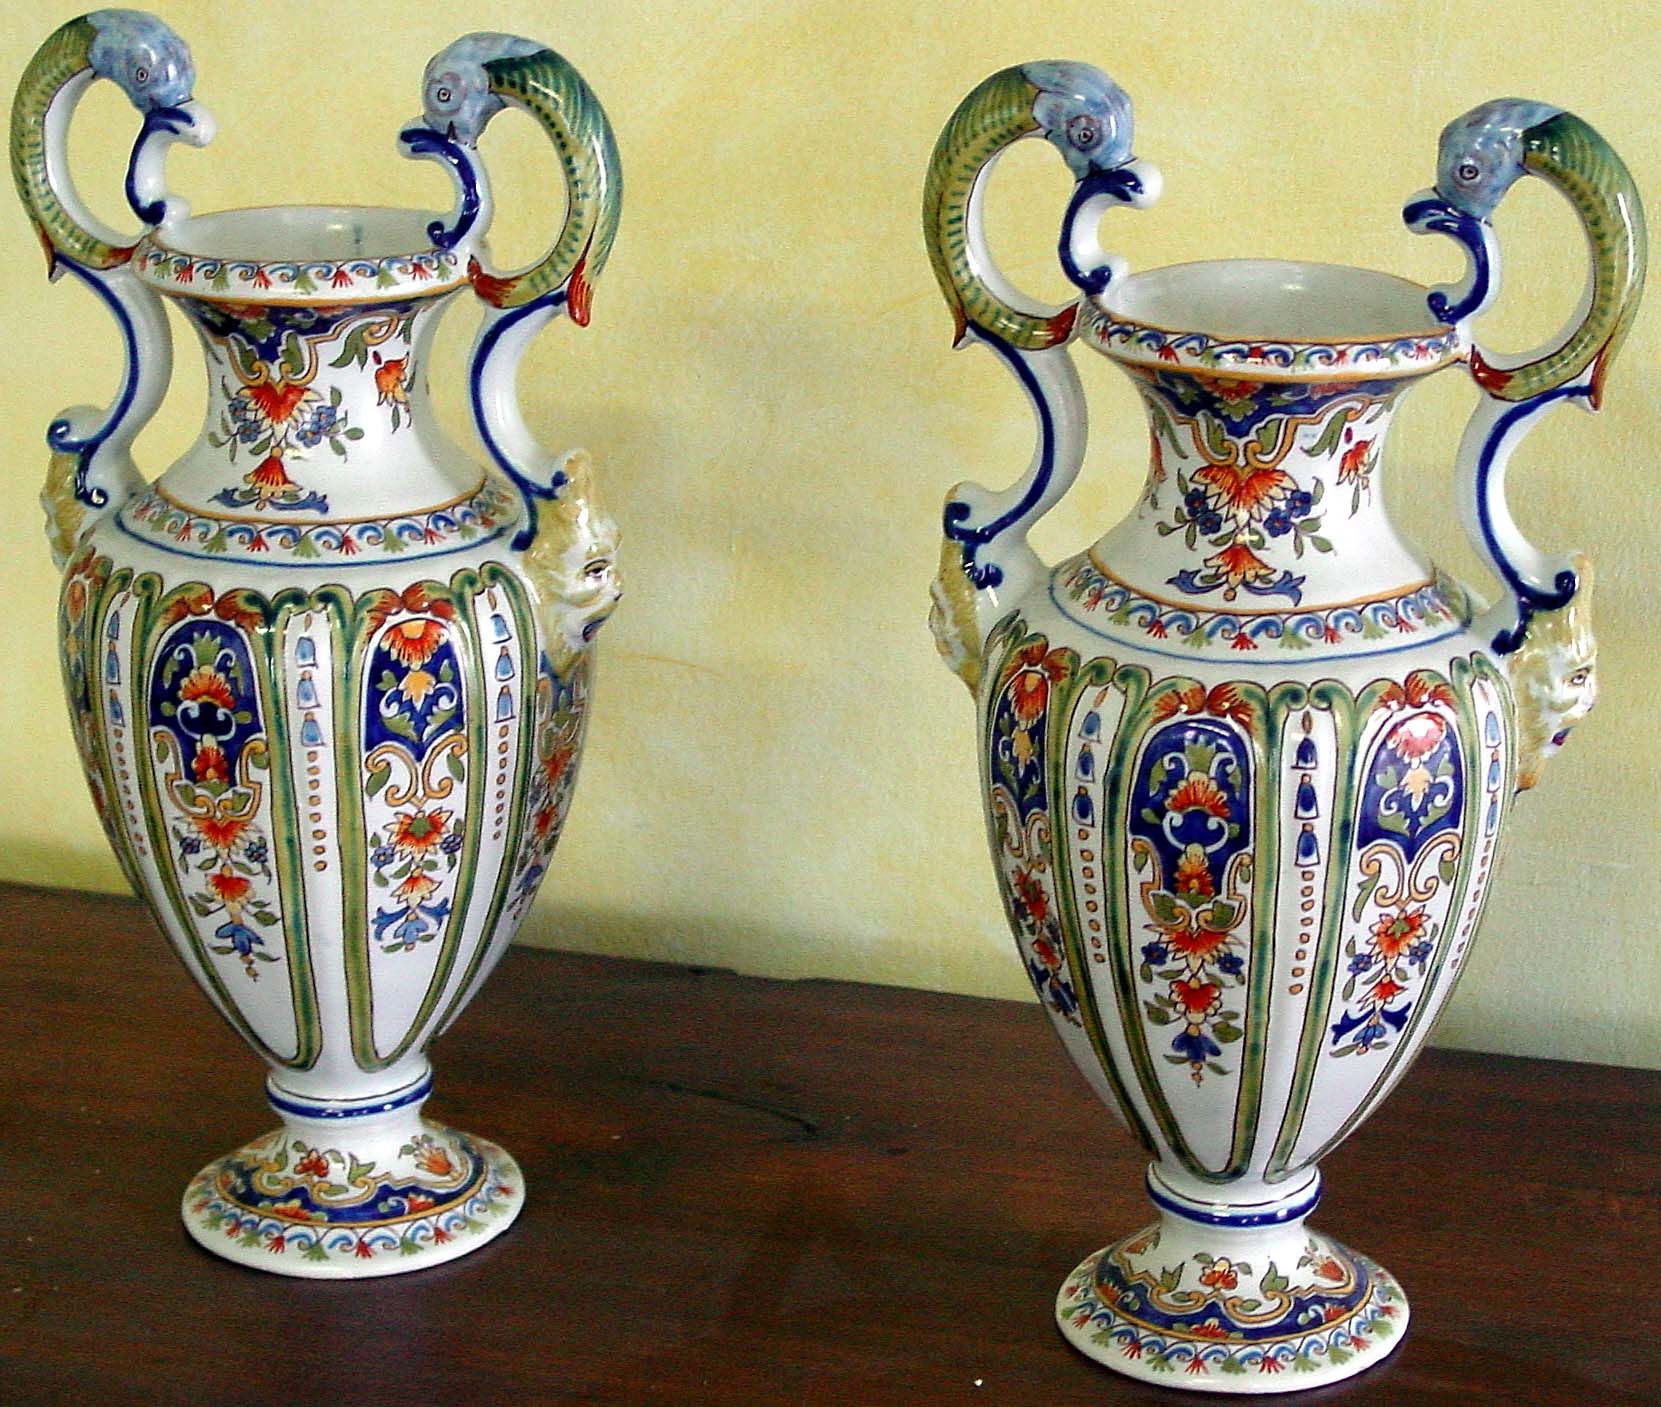 Pair of French faience vases